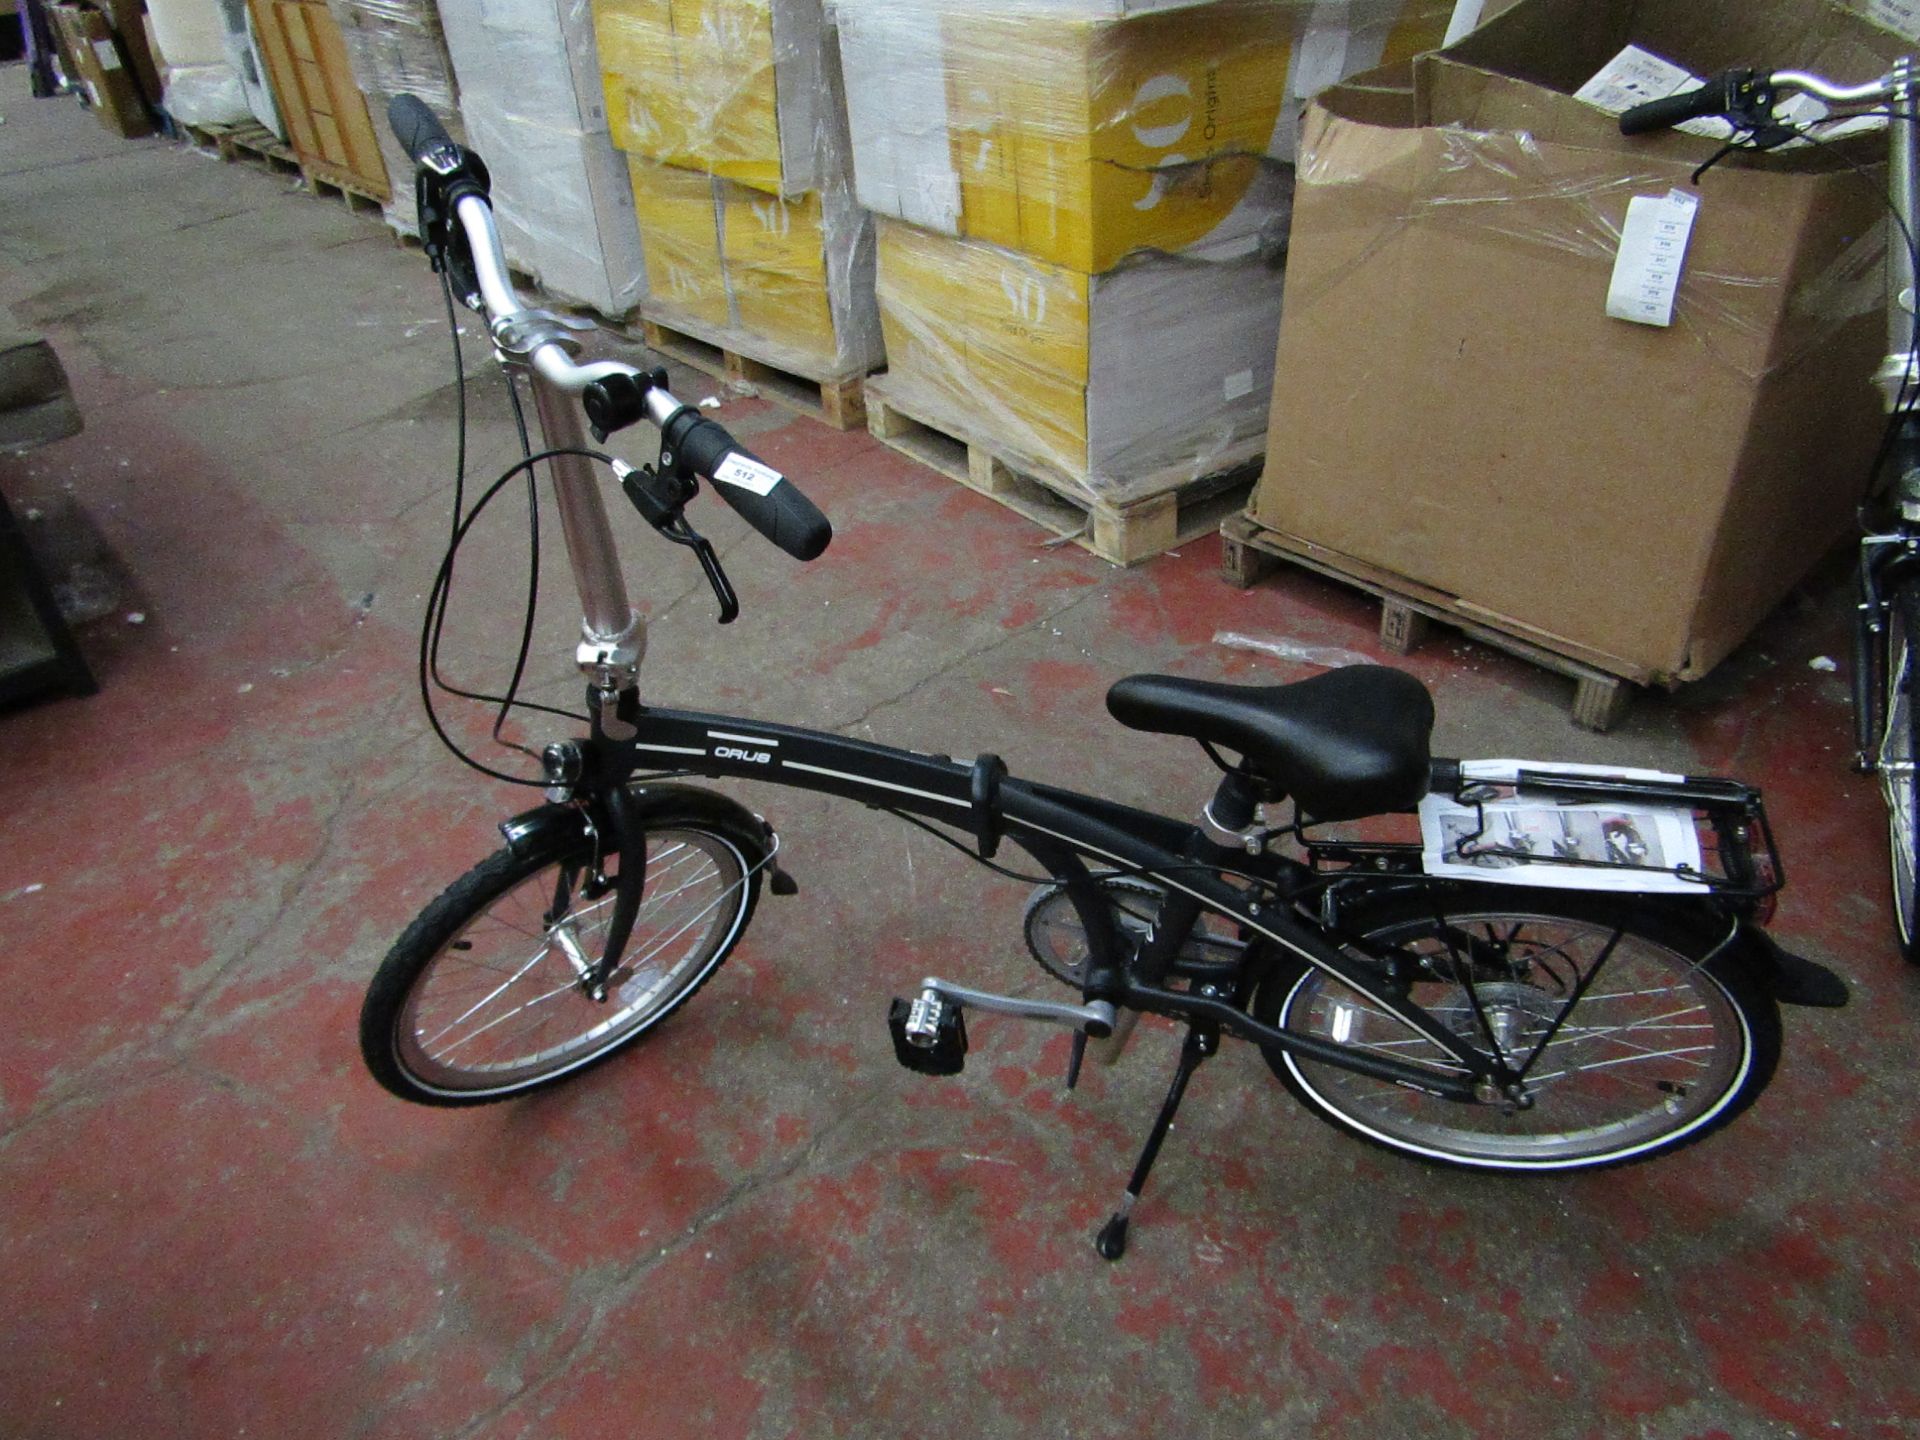 Orus 001 foldable bike with carry bag, unused but may have very minor marks, RRP Circa £300